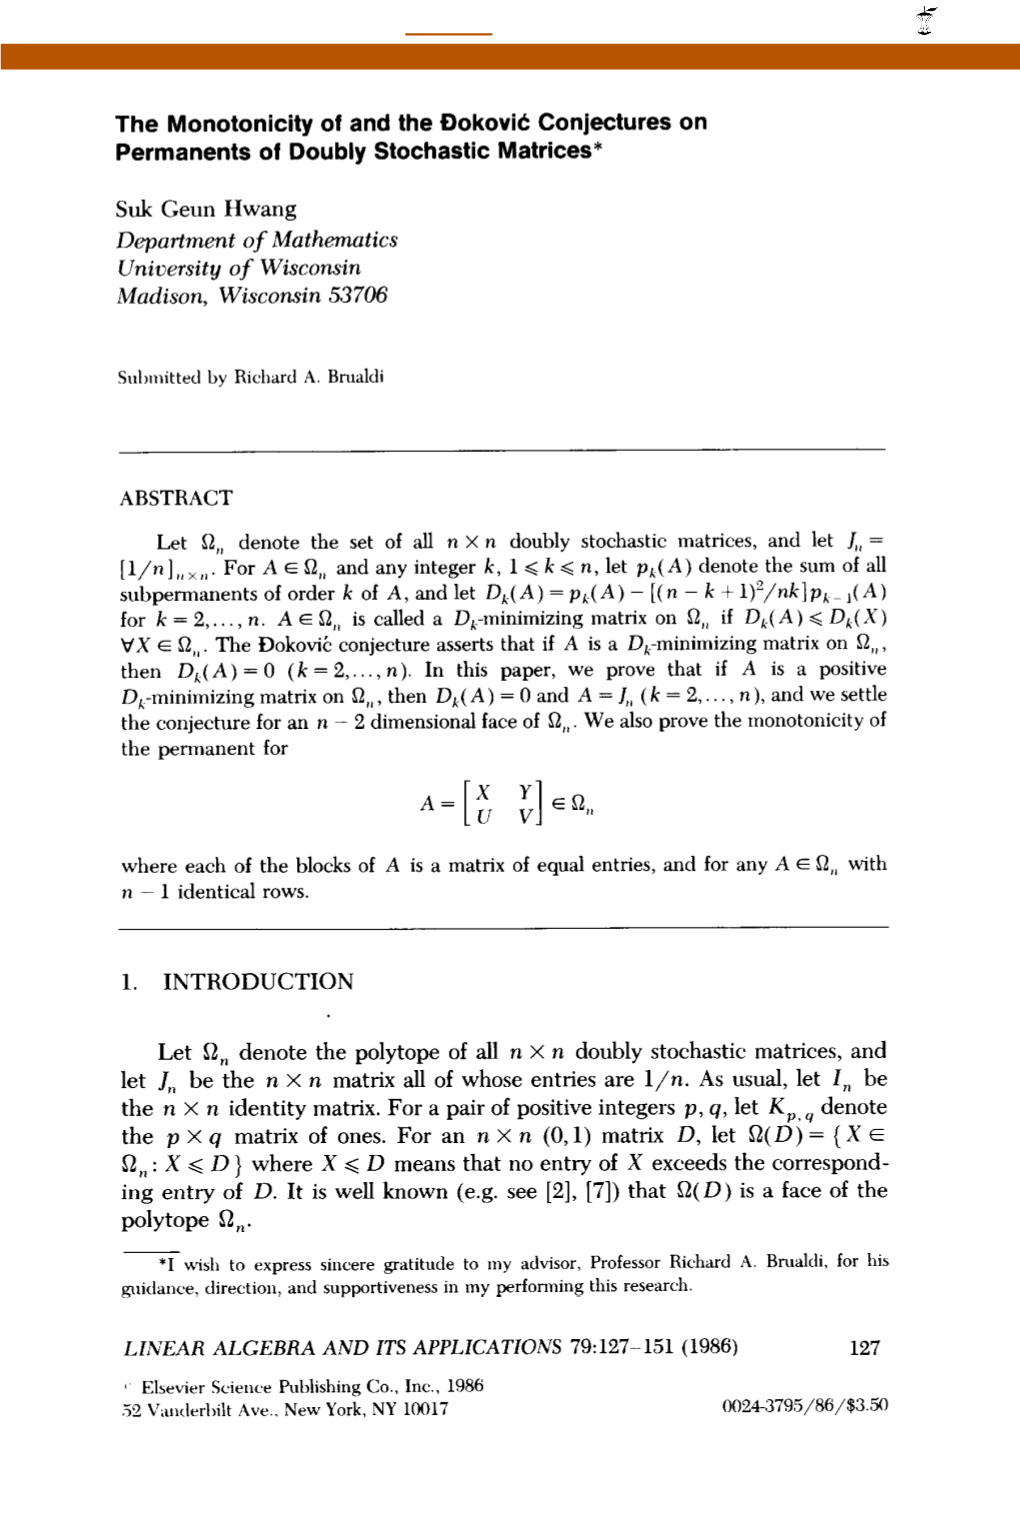 The Monotonicity of and the Dokovic Conjectures on Permanents of Doubly Stochastic Matrices*